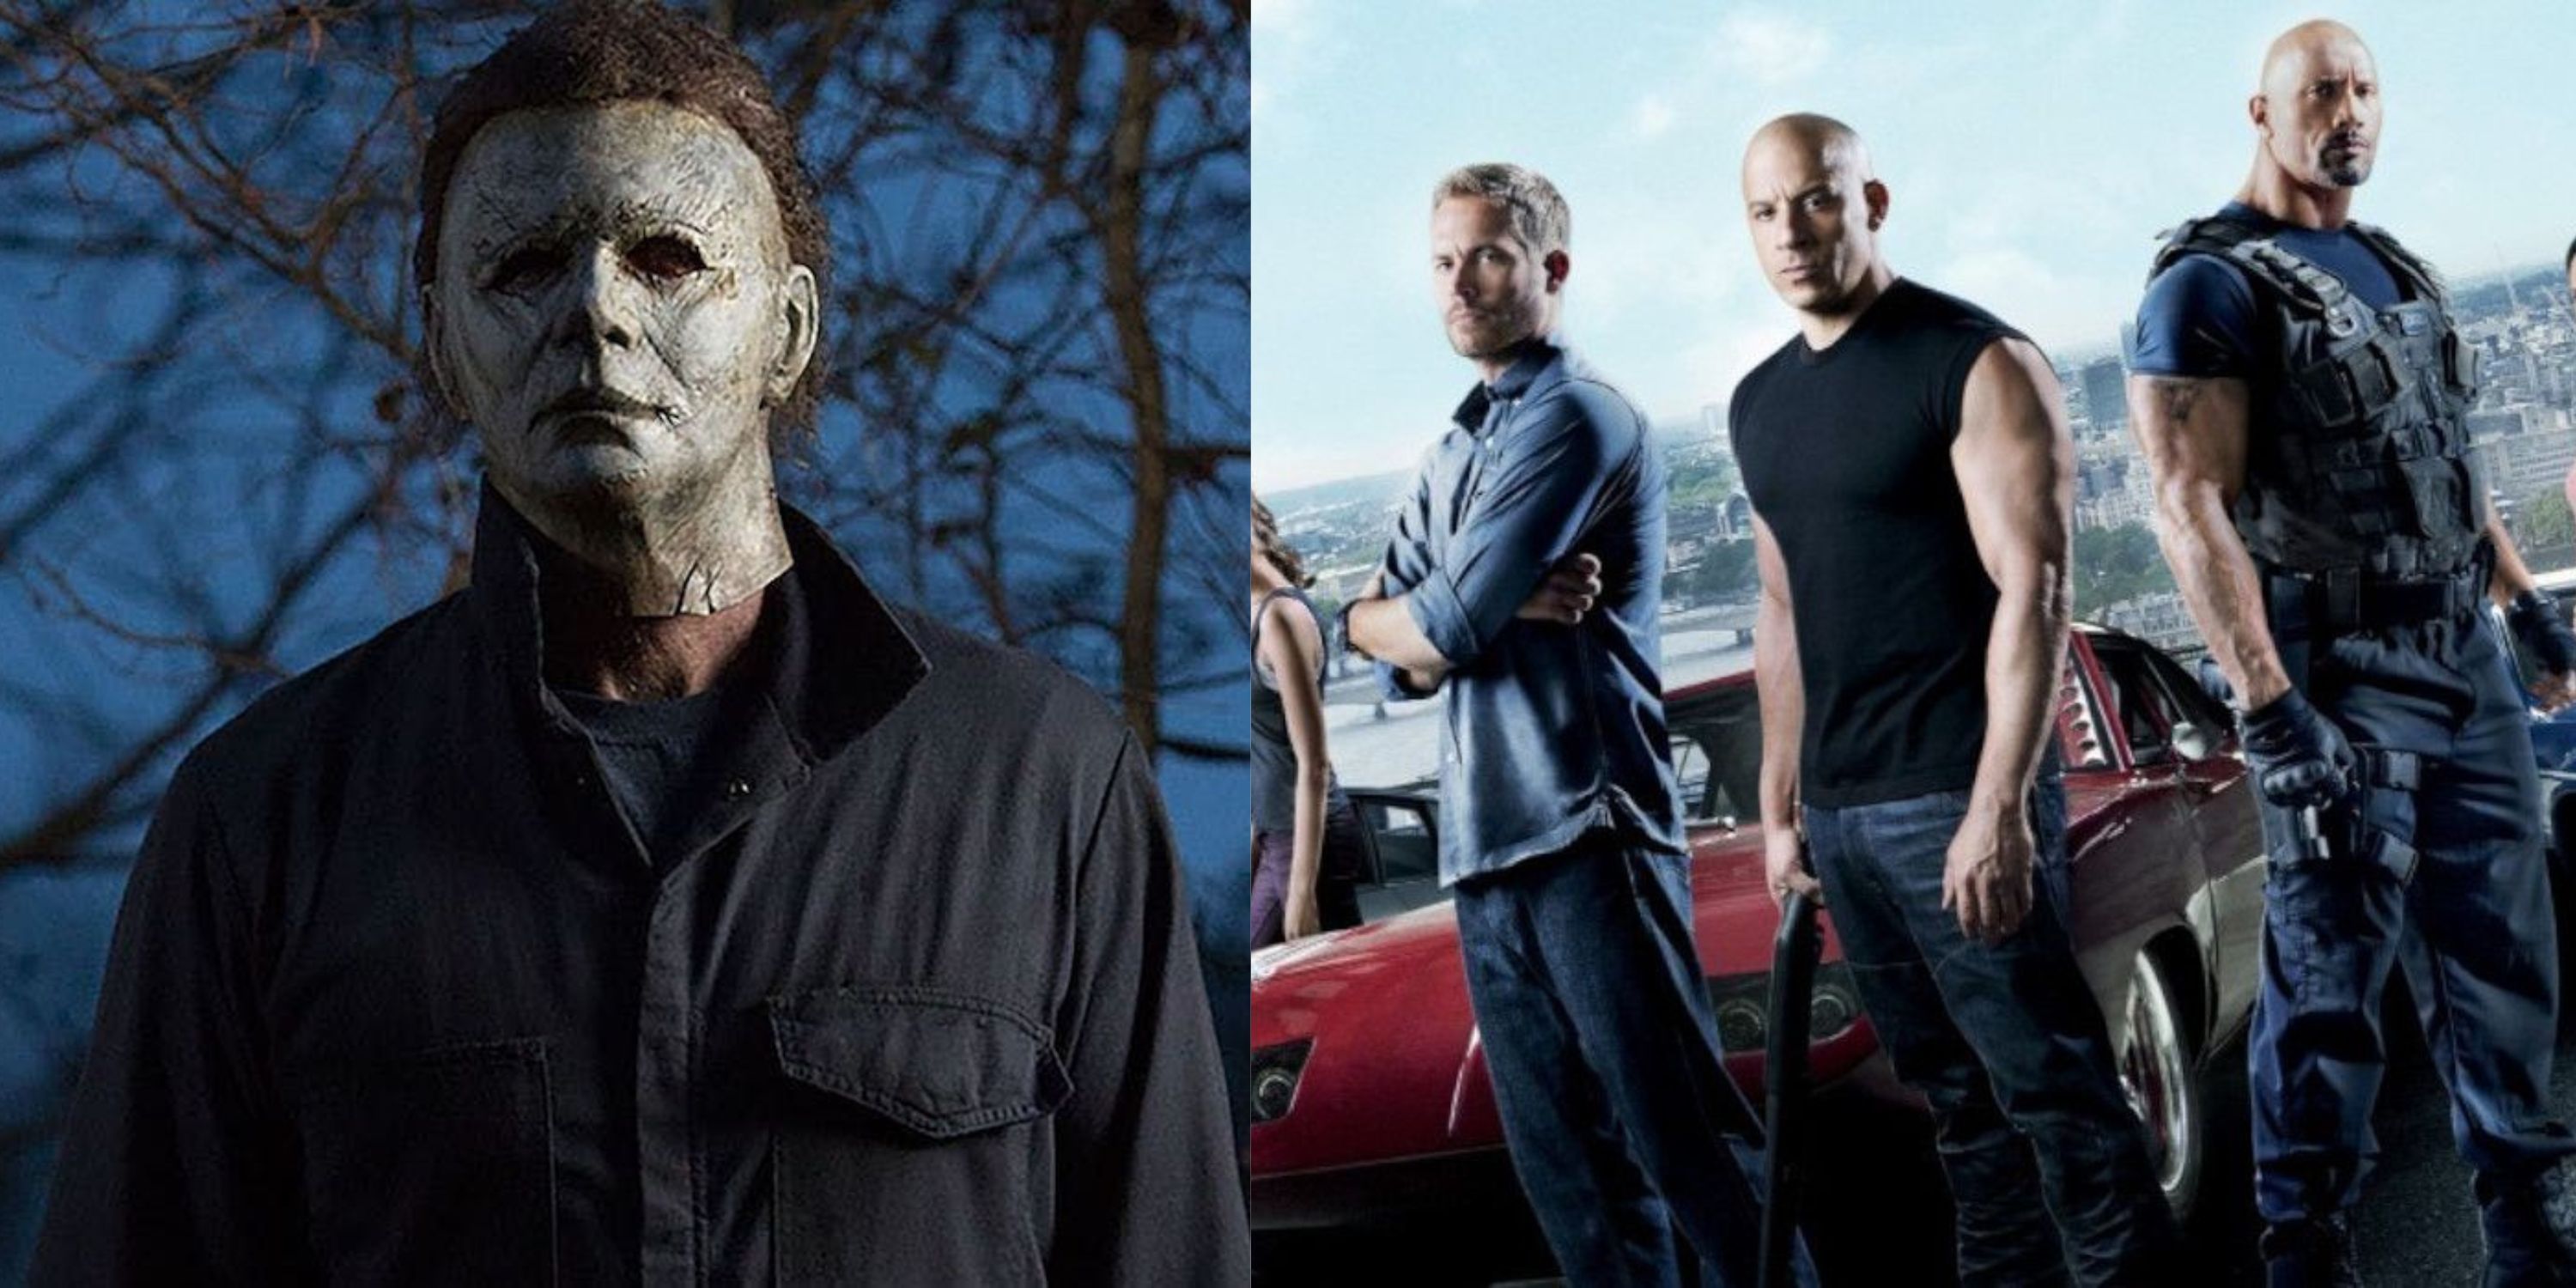 Featured image Michael Myers in Halloween 2018 and Vin Diesel Paul Walker and Dwayne Johnson on the poster for Fast and Furious 6